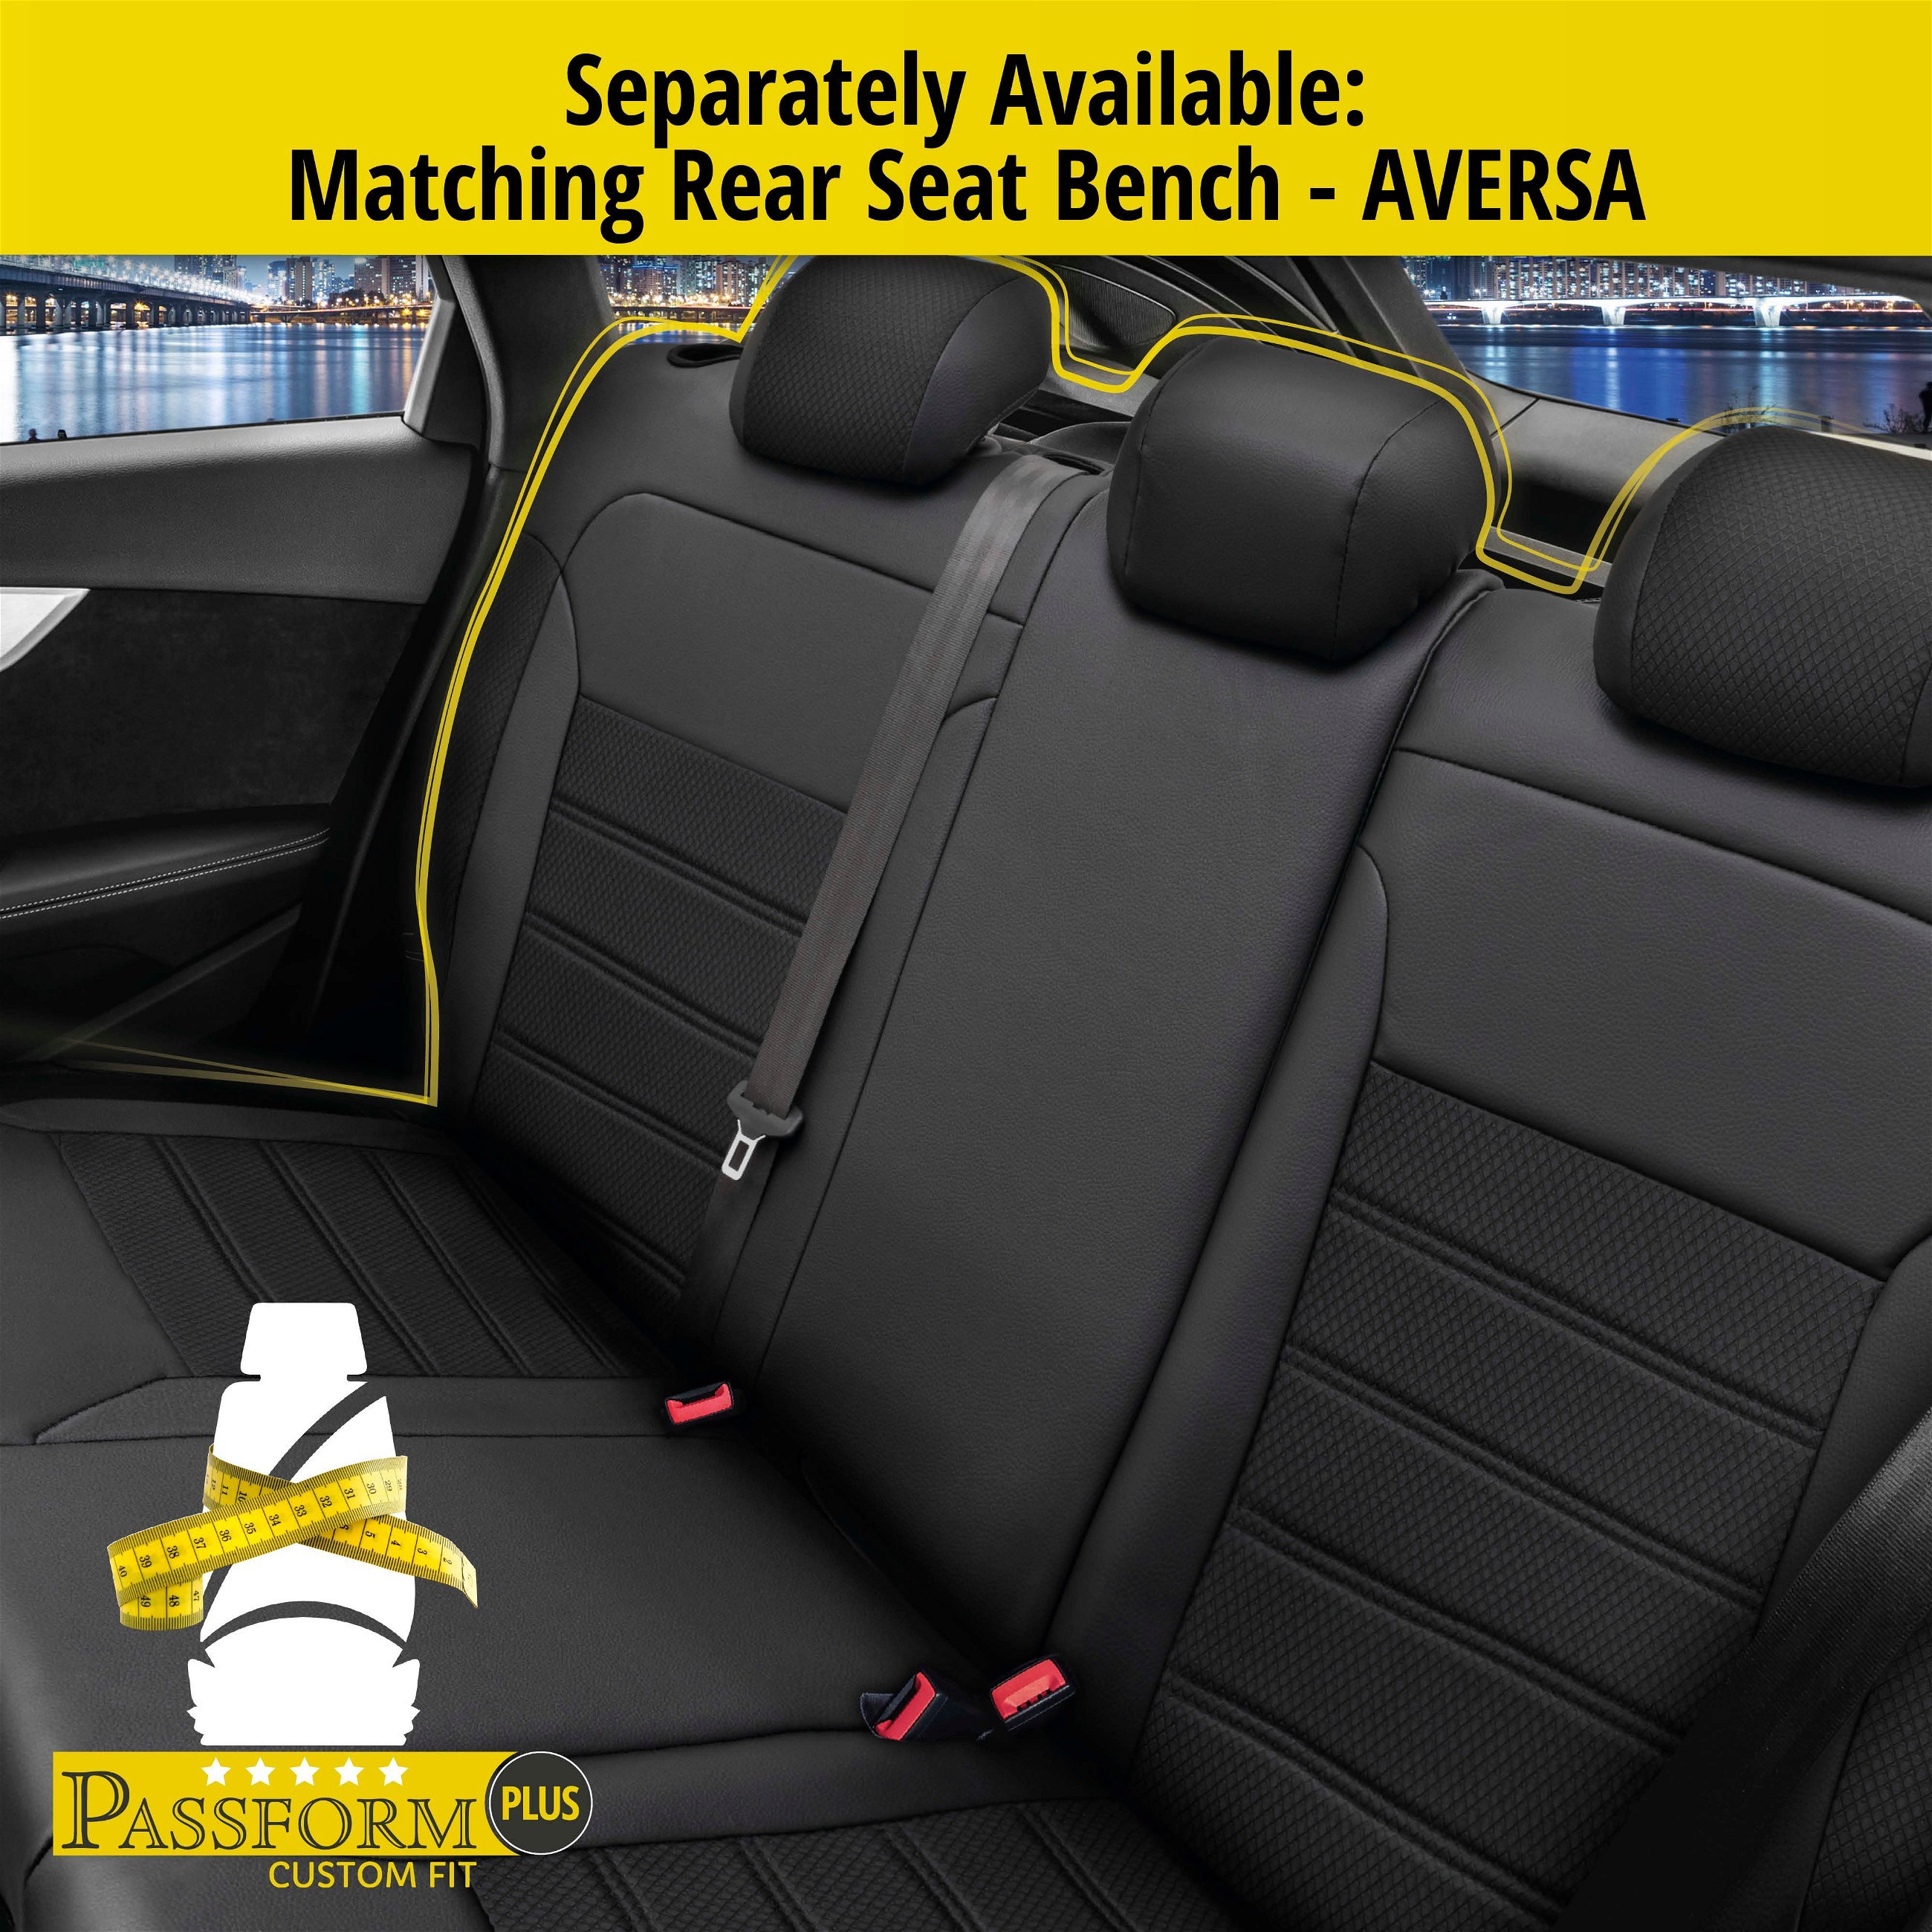 Seat Cover Aversa for Ford Focus II Turnier 07/2004-09/2012, 2 seat covers for normal seats